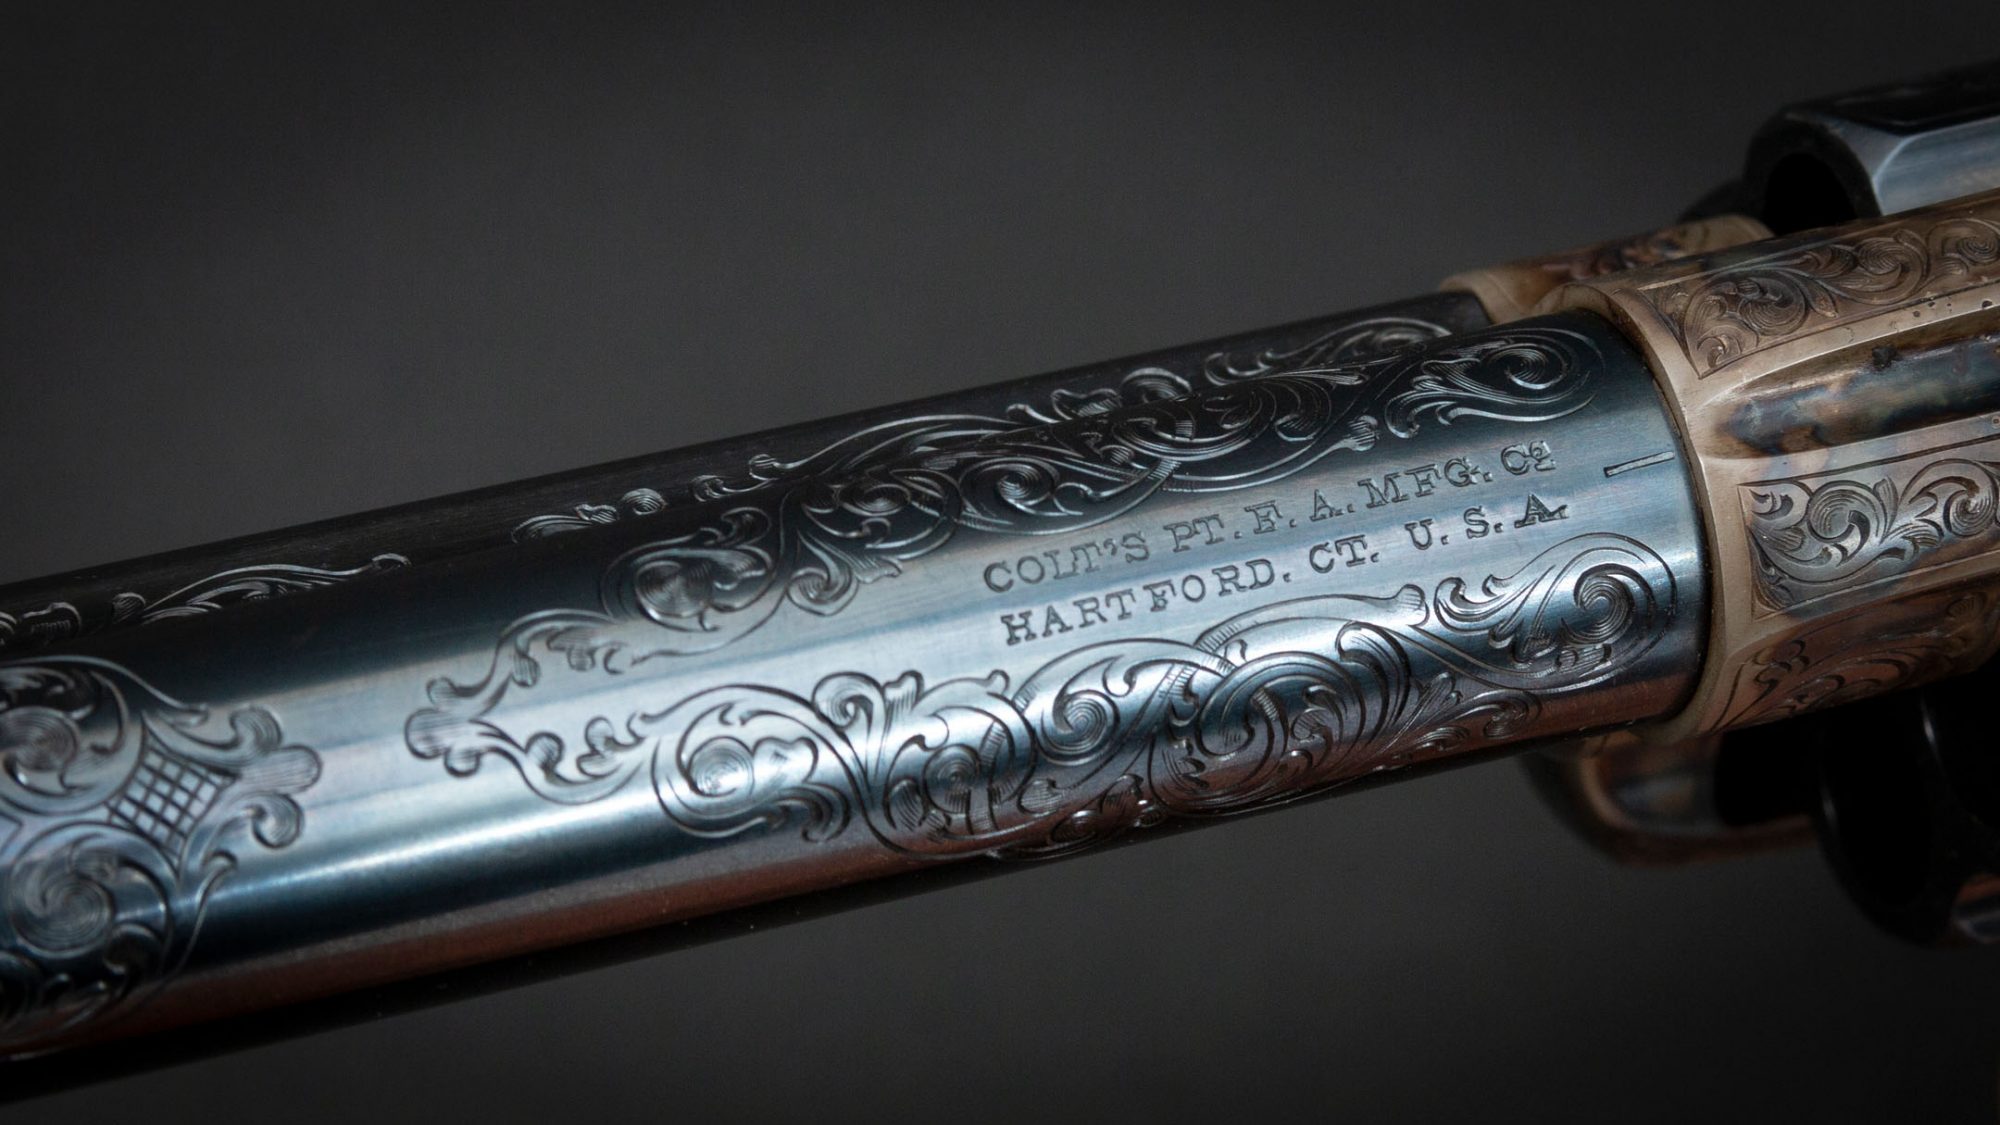 Colt SAA revolver in .45 Colt engraved by Lee Griffiths, for sale by Turnbull Restoration Co. of Bloomfield, NY